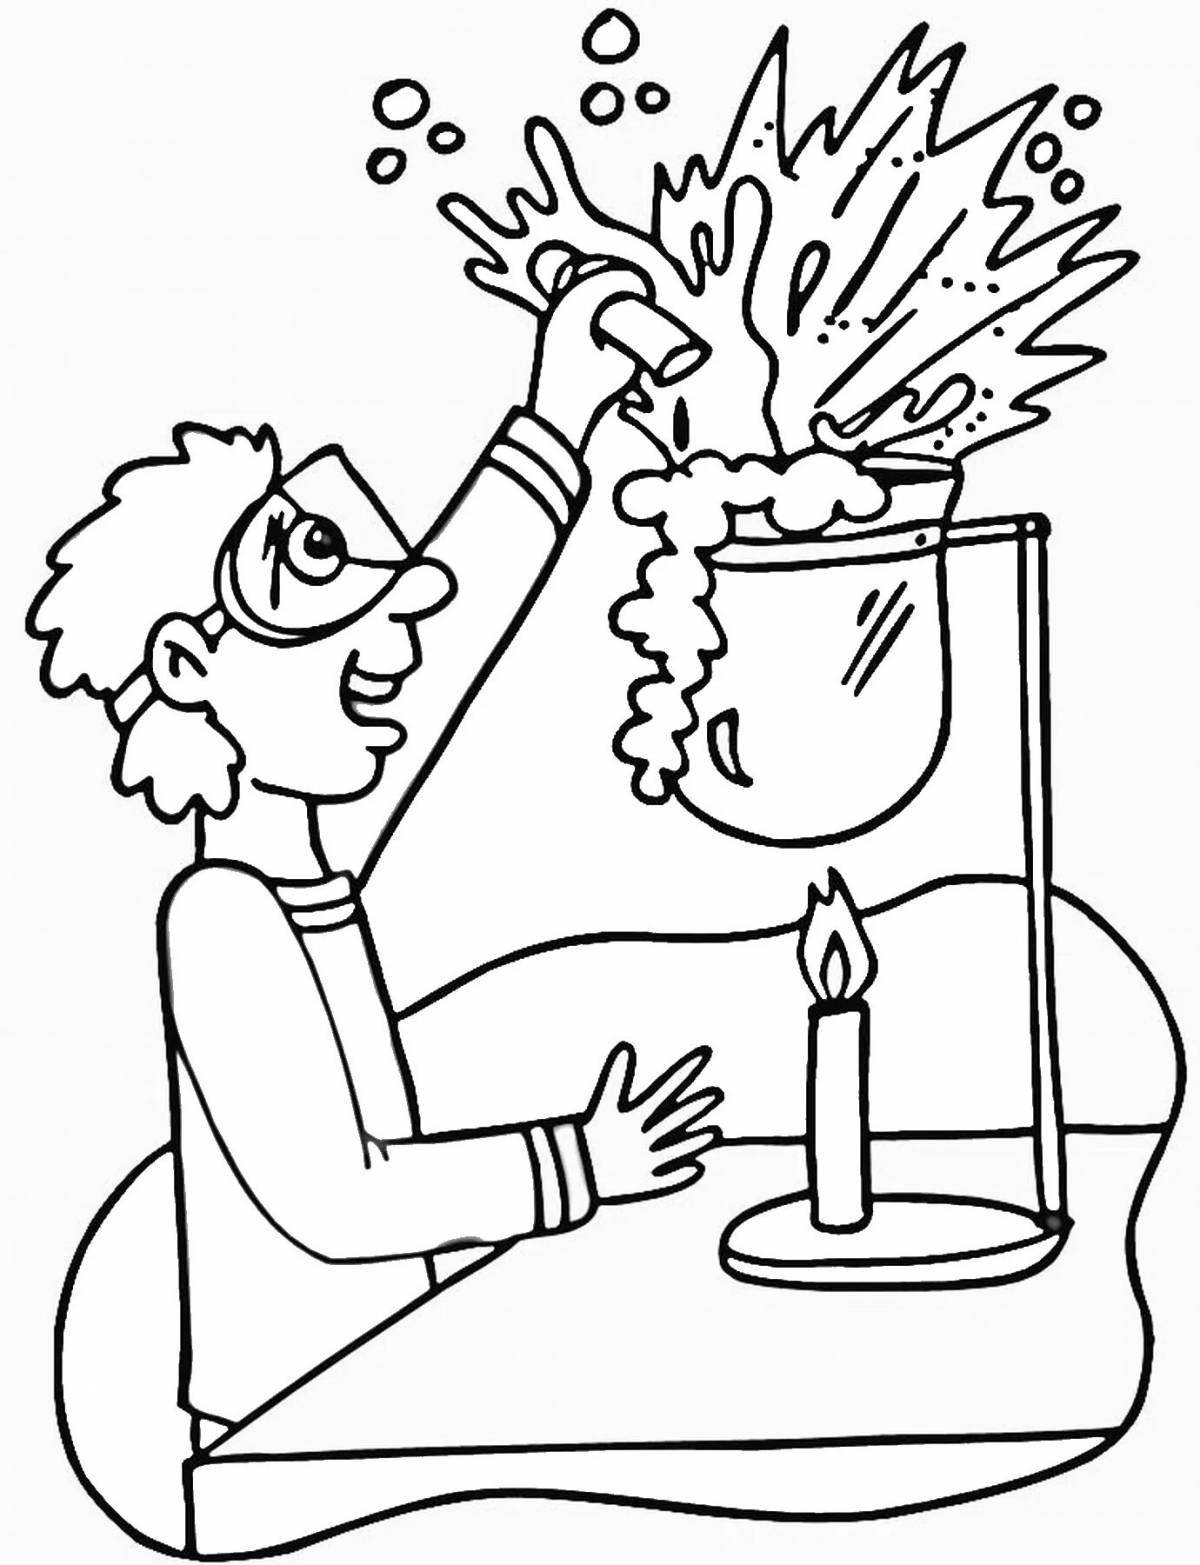 Coloring page adorable children's inventions